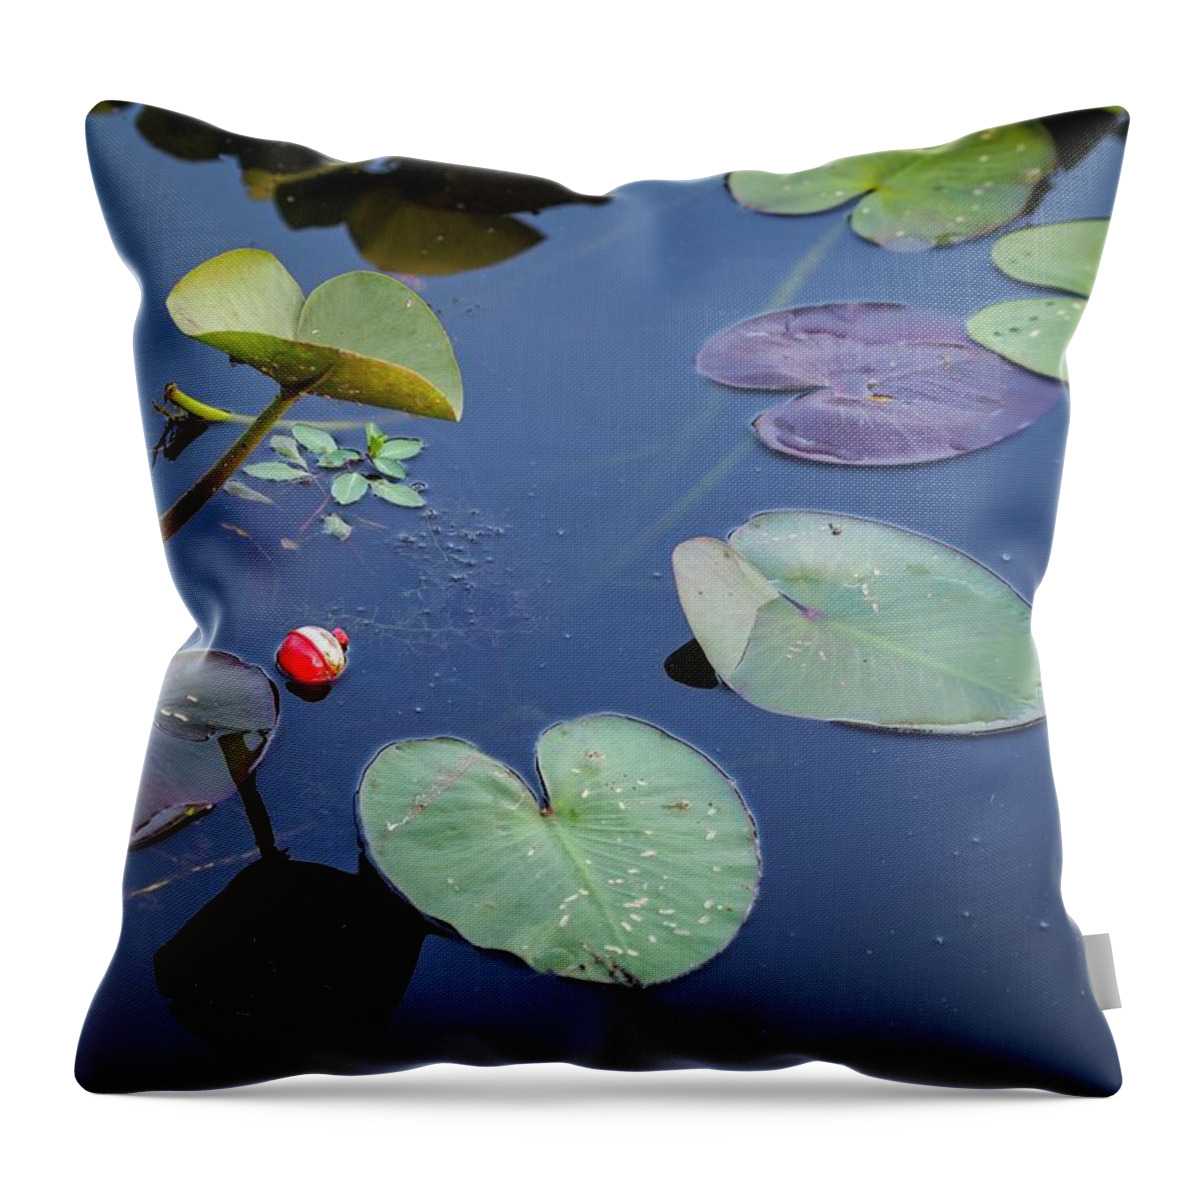 Red Throw Pillow featuring the photograph Bobber and Pads by Buck Buchanan